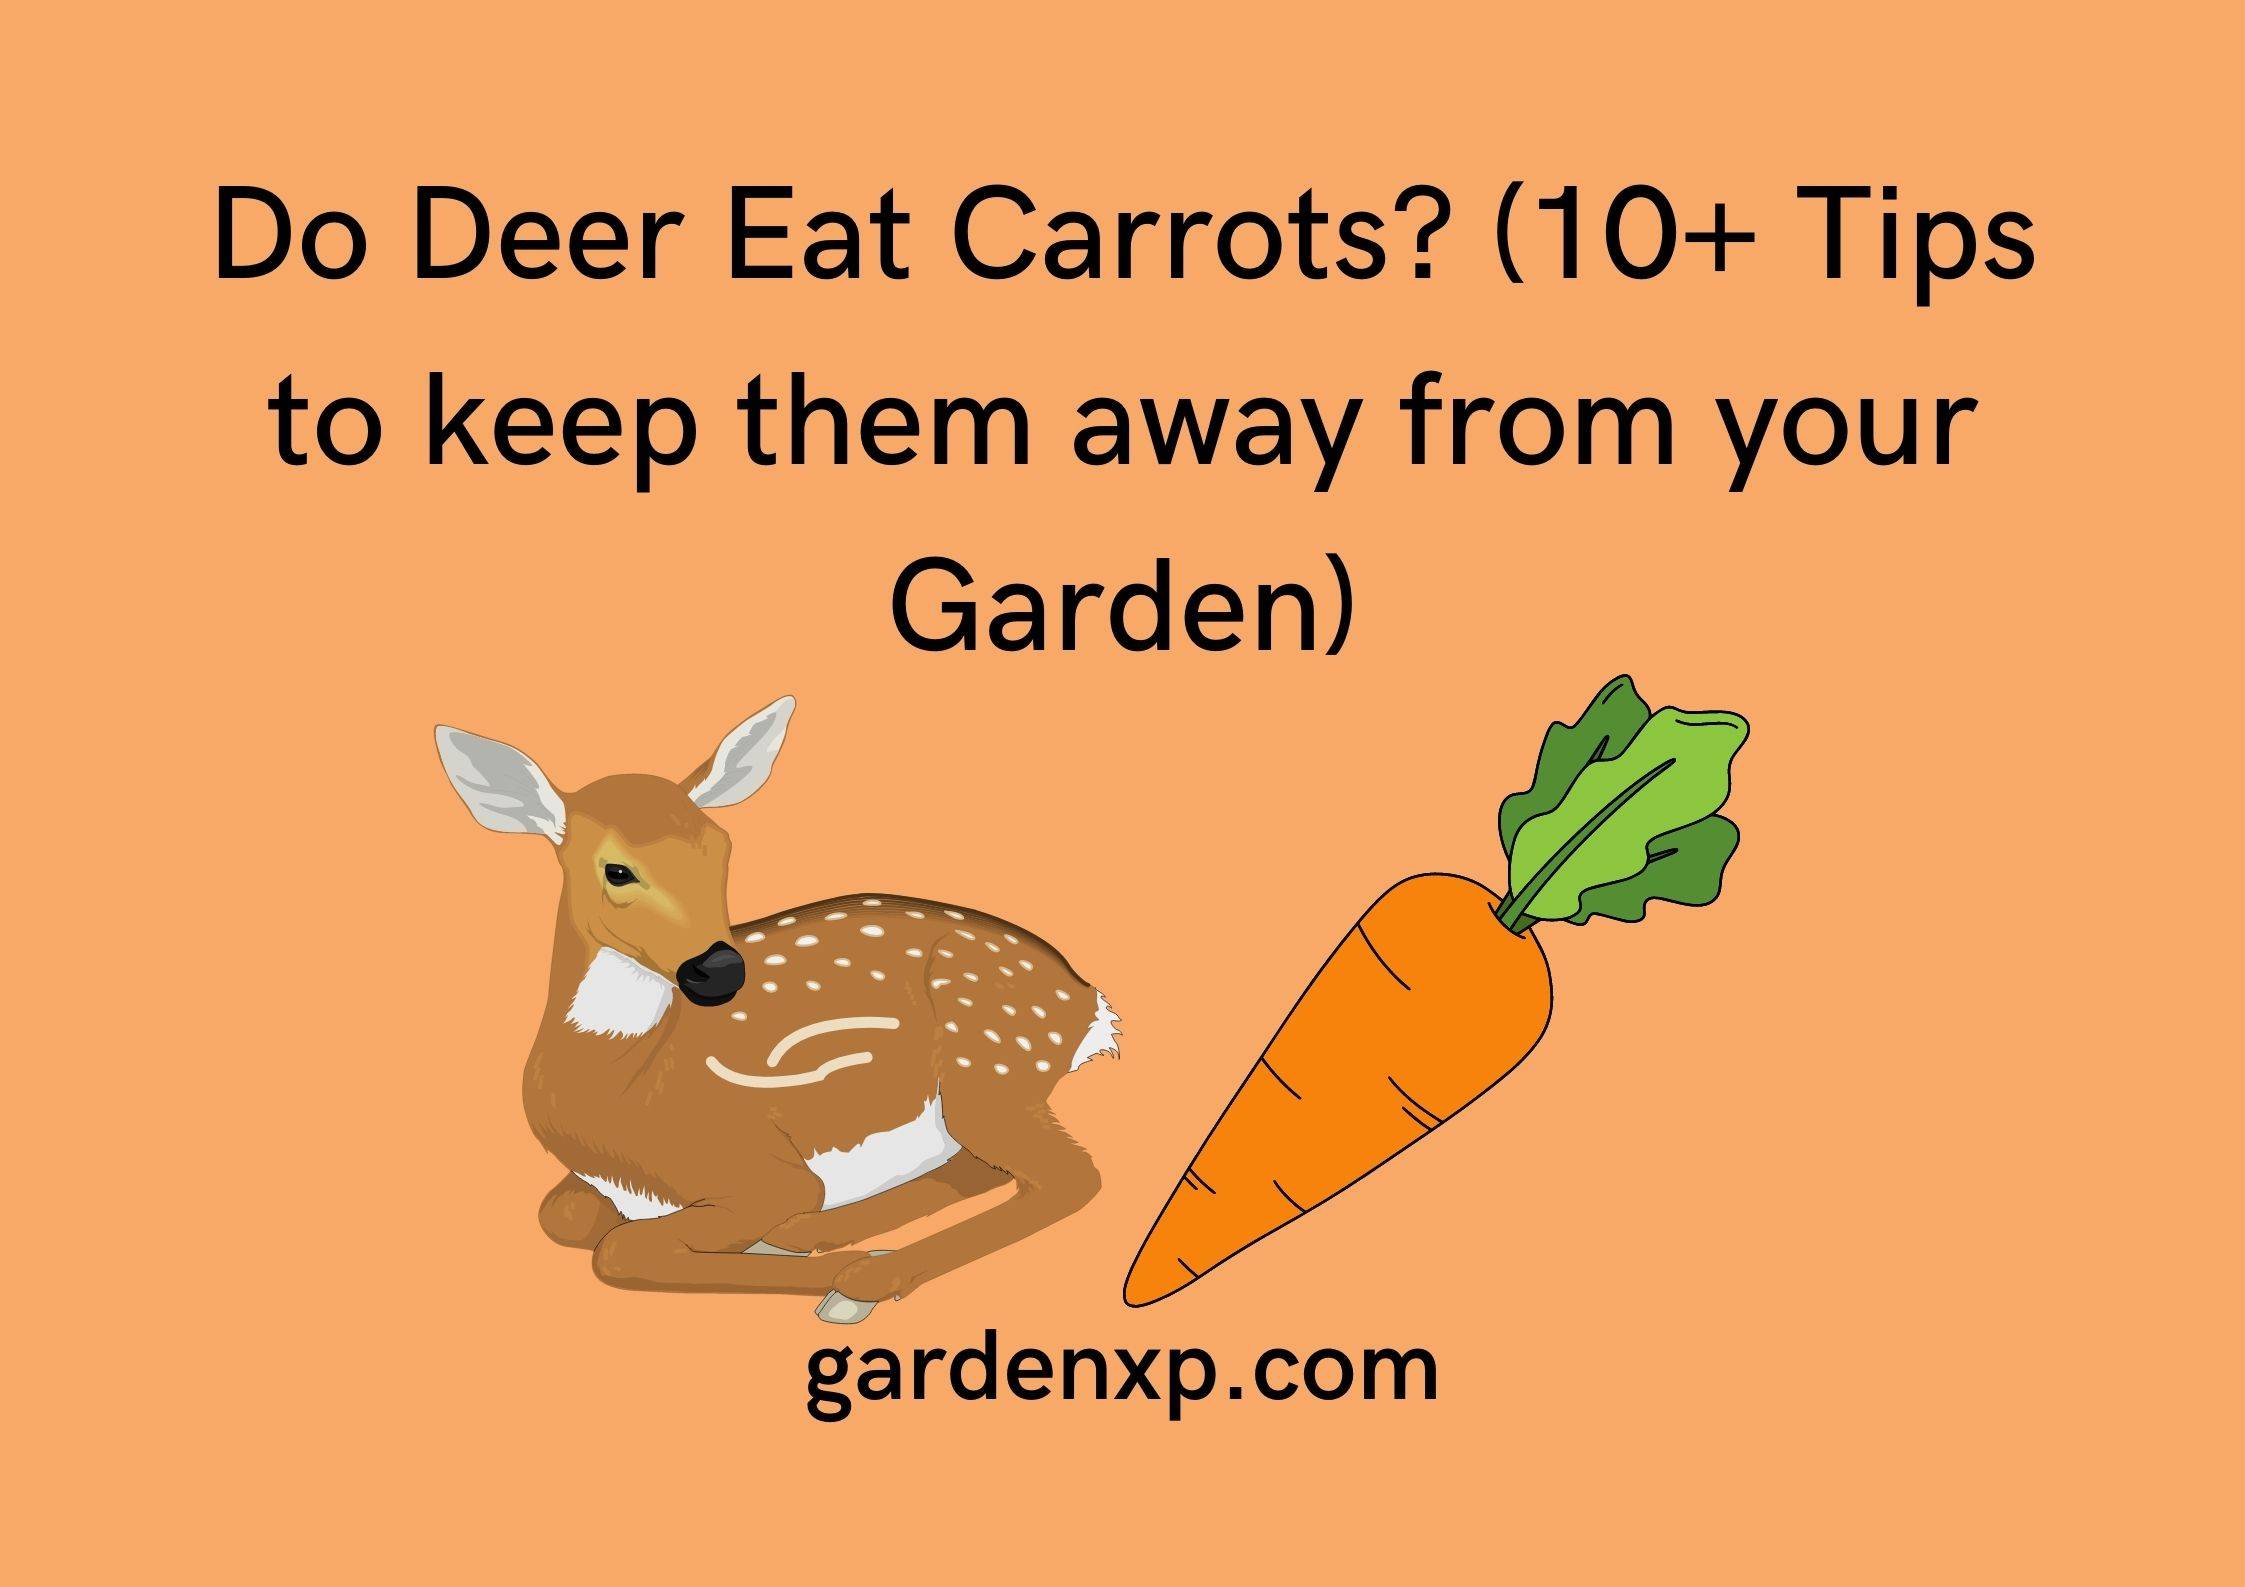 <strong>Do Deer Eat Carrots? (10+ Tips to keep them away from your Garden)</strong>